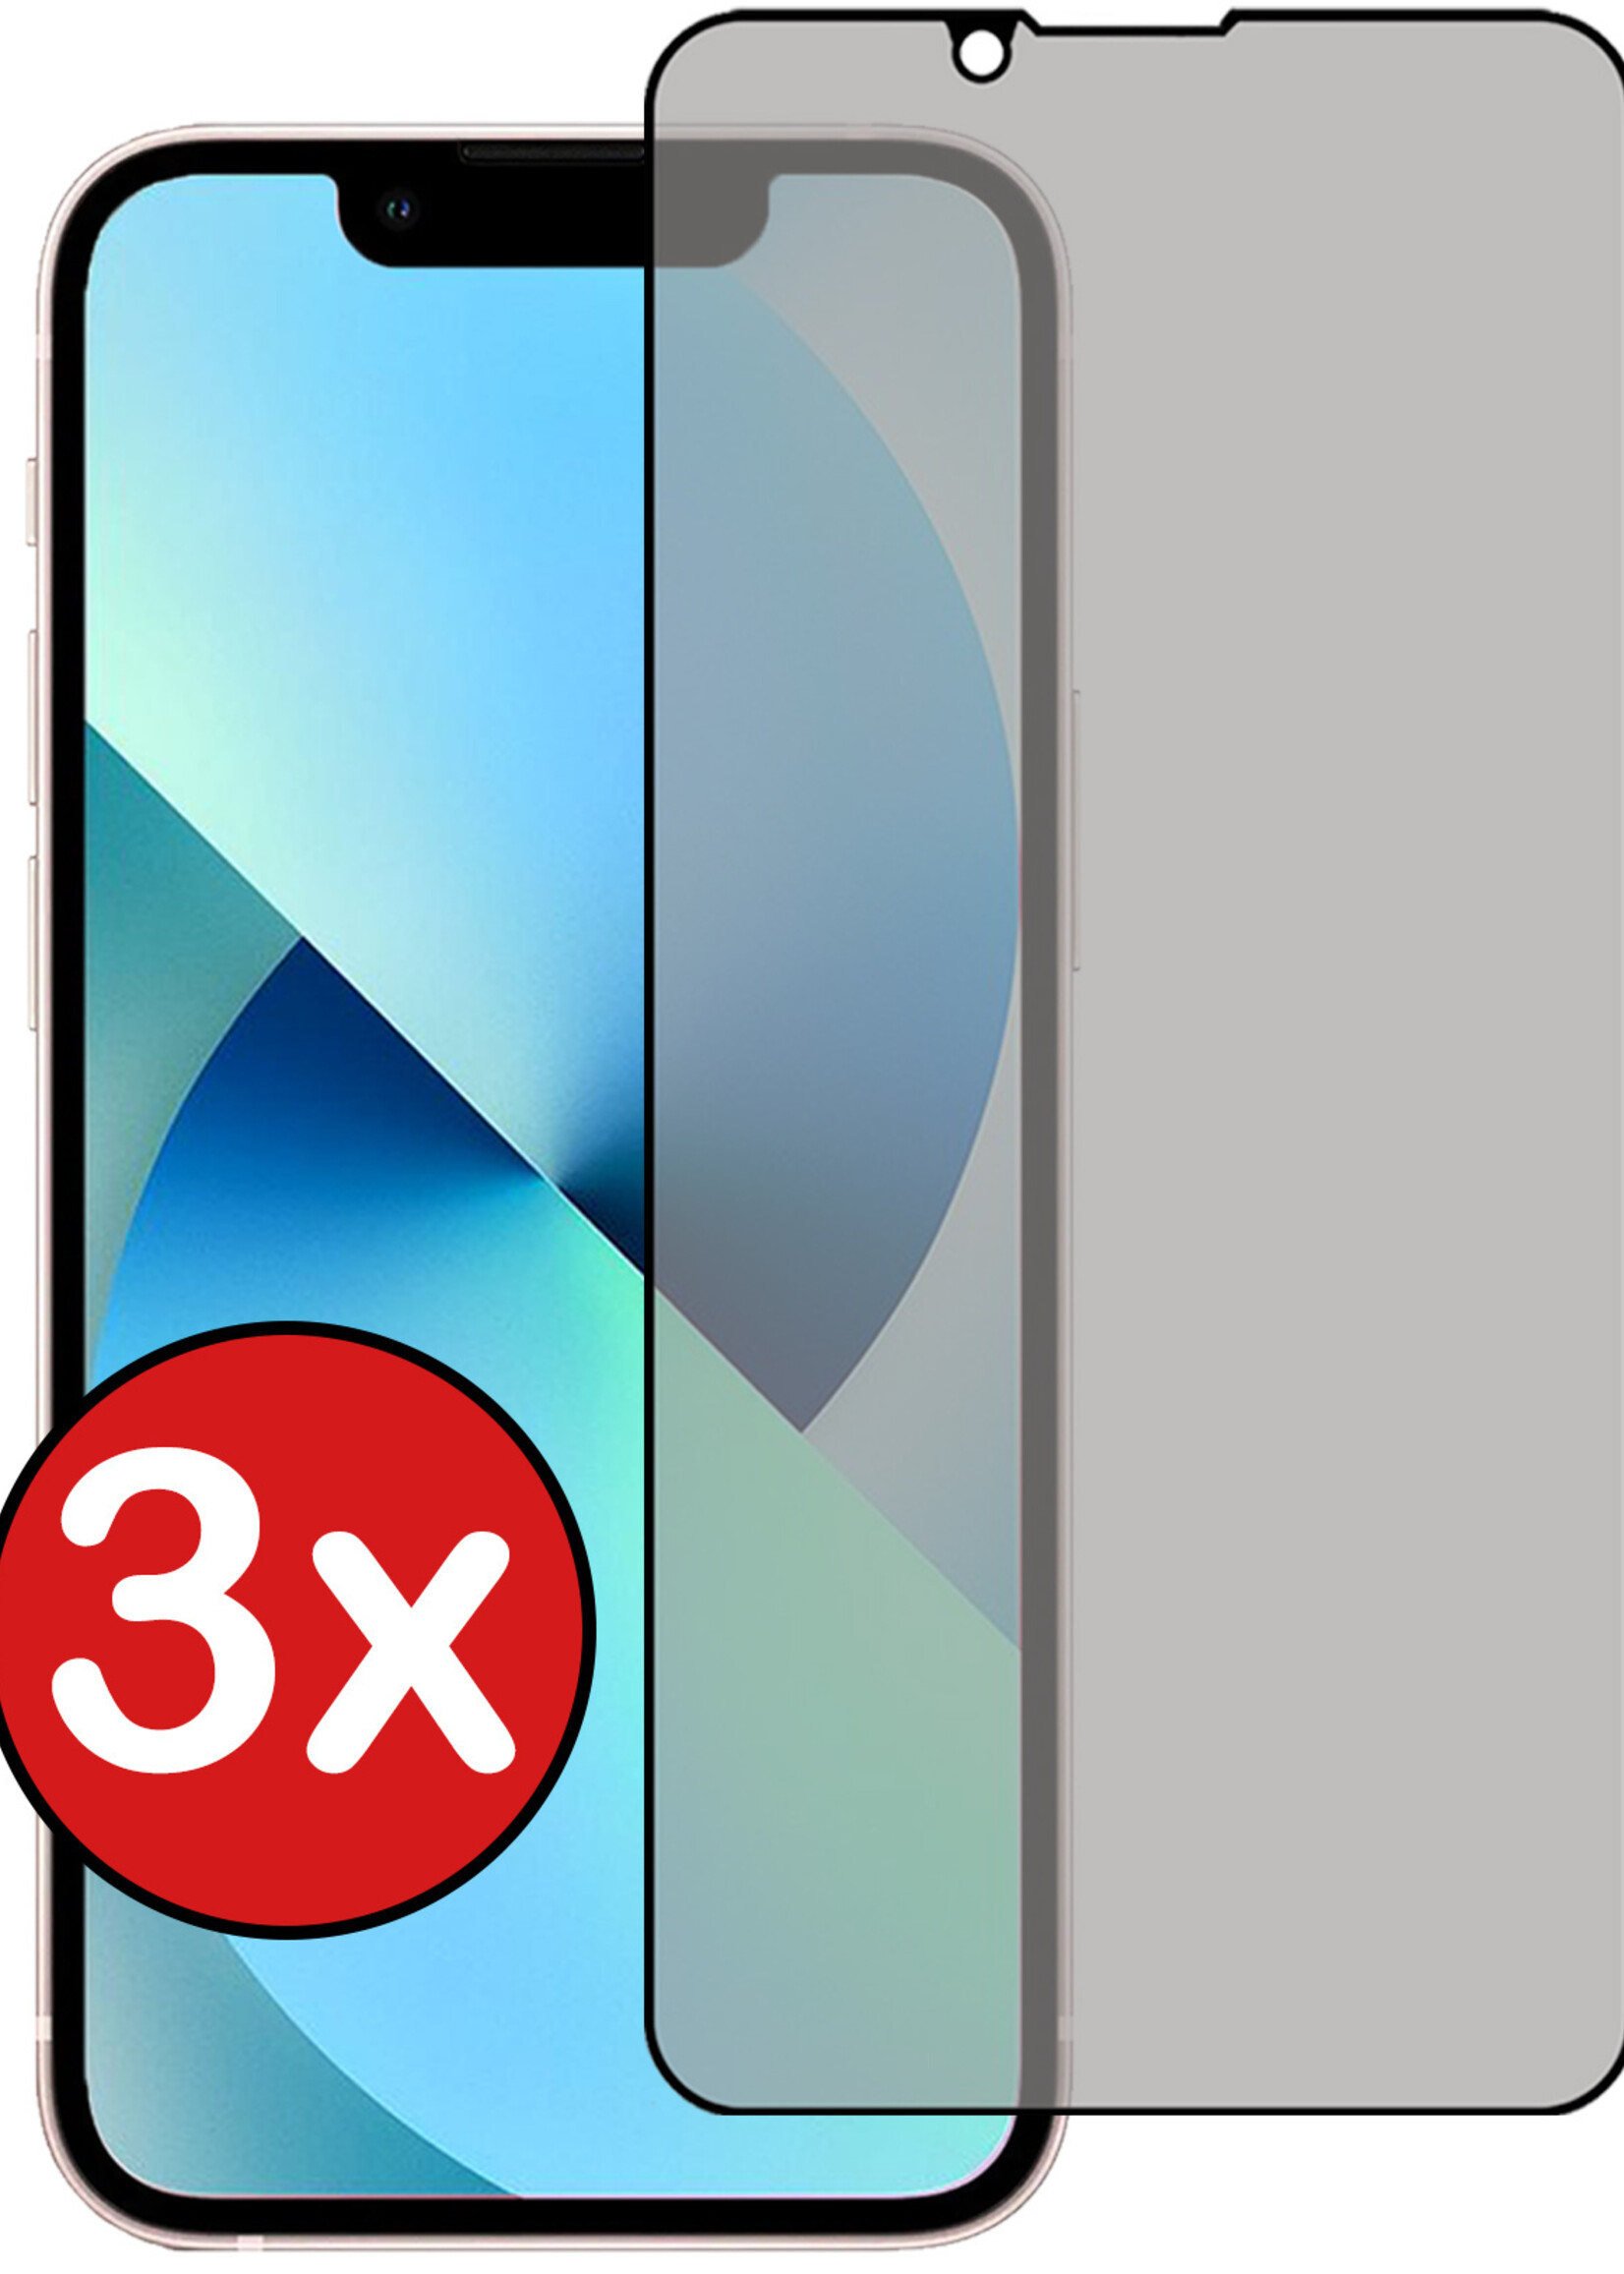 BTH Screenprotector Geschikt voor iPhone 13 Pro Screenprotector Privacy Glas Gehard Full Cover - Screenprotector Geschikt voor iPhone 13 Pro Screenprotector Privacy Tempered Glass - 3 PACK